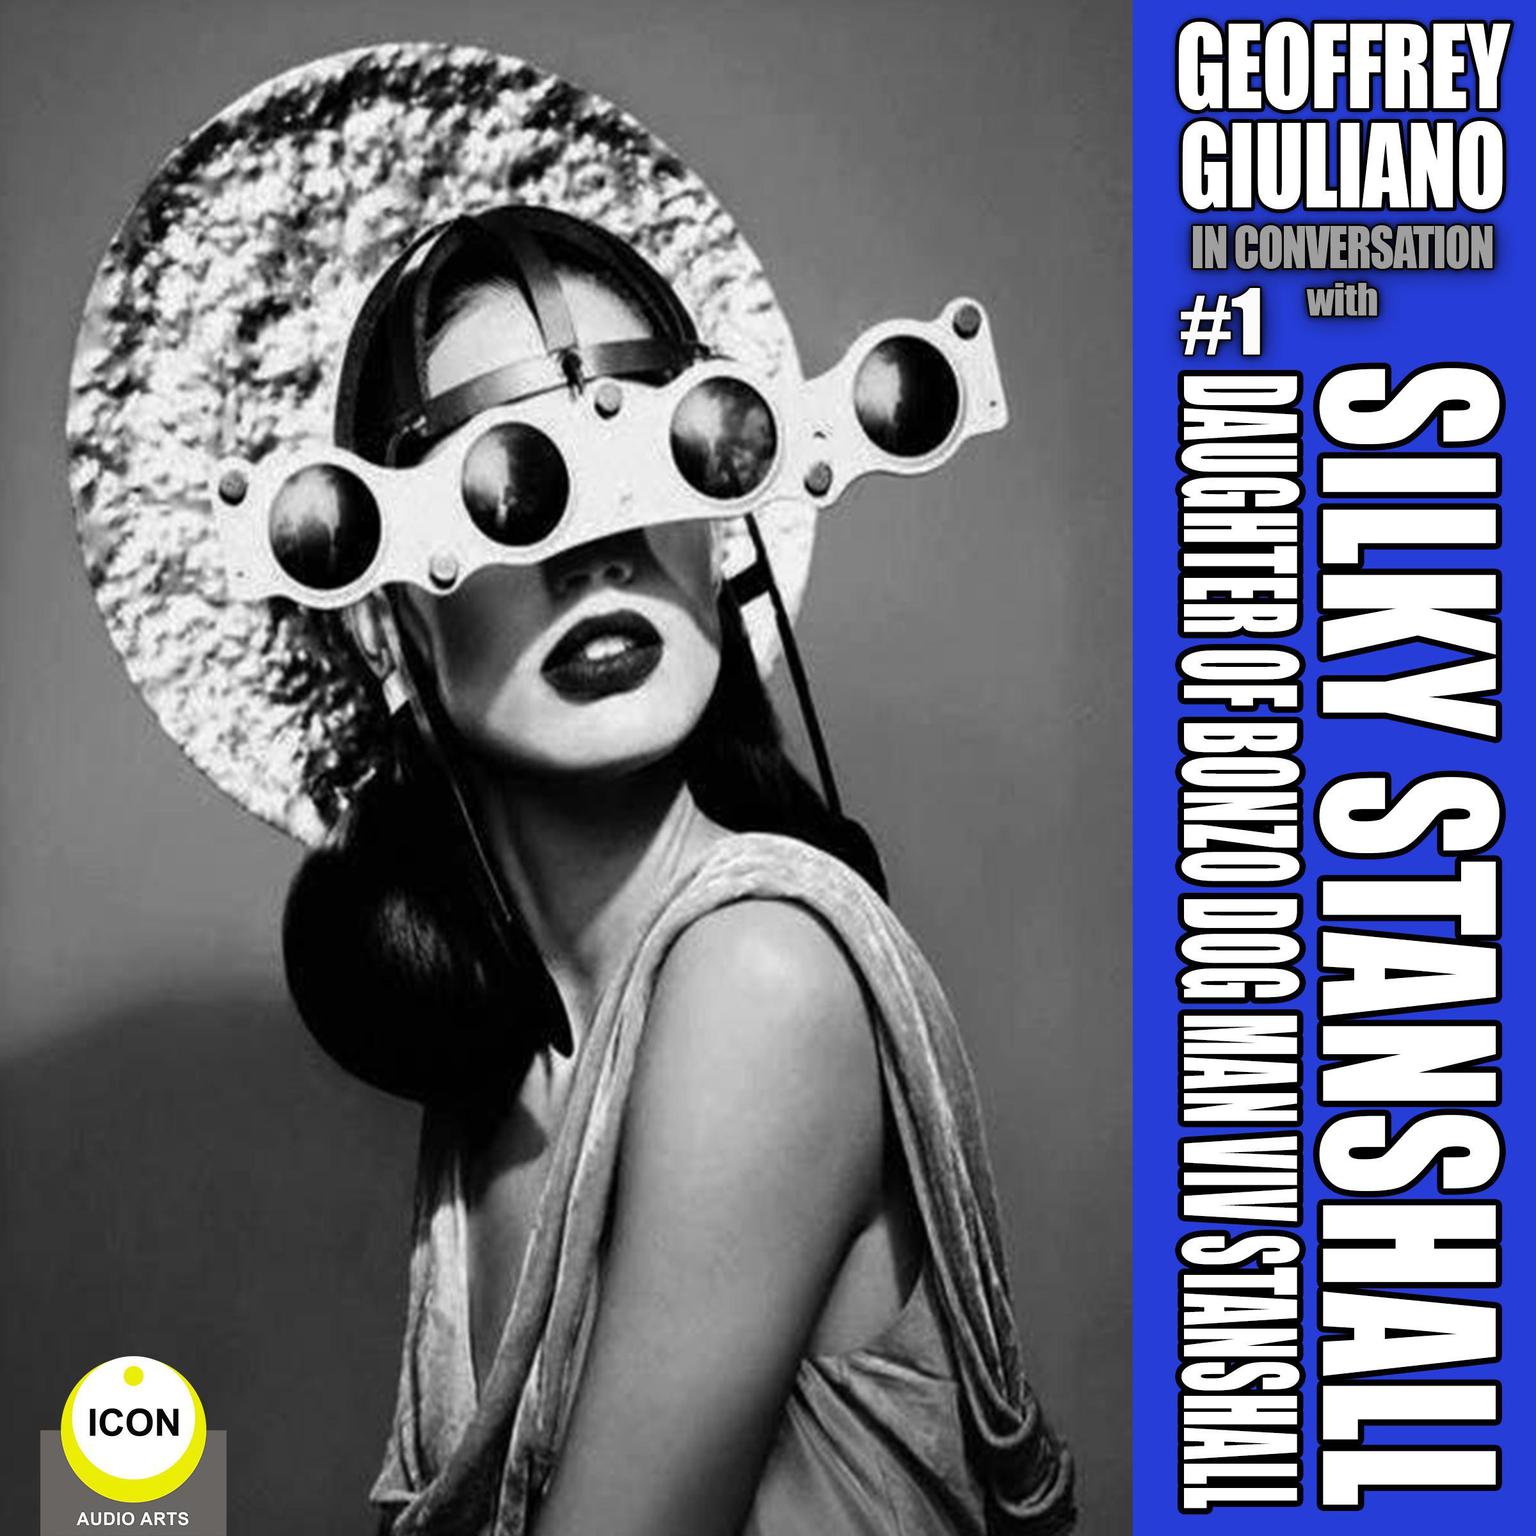 Geoffrey Giuliano In Conversation with Silky Stanshall - Daughter Of Bonzo Dog Man Viv Stanshall Audiobook, by Geoffrey Giuliano